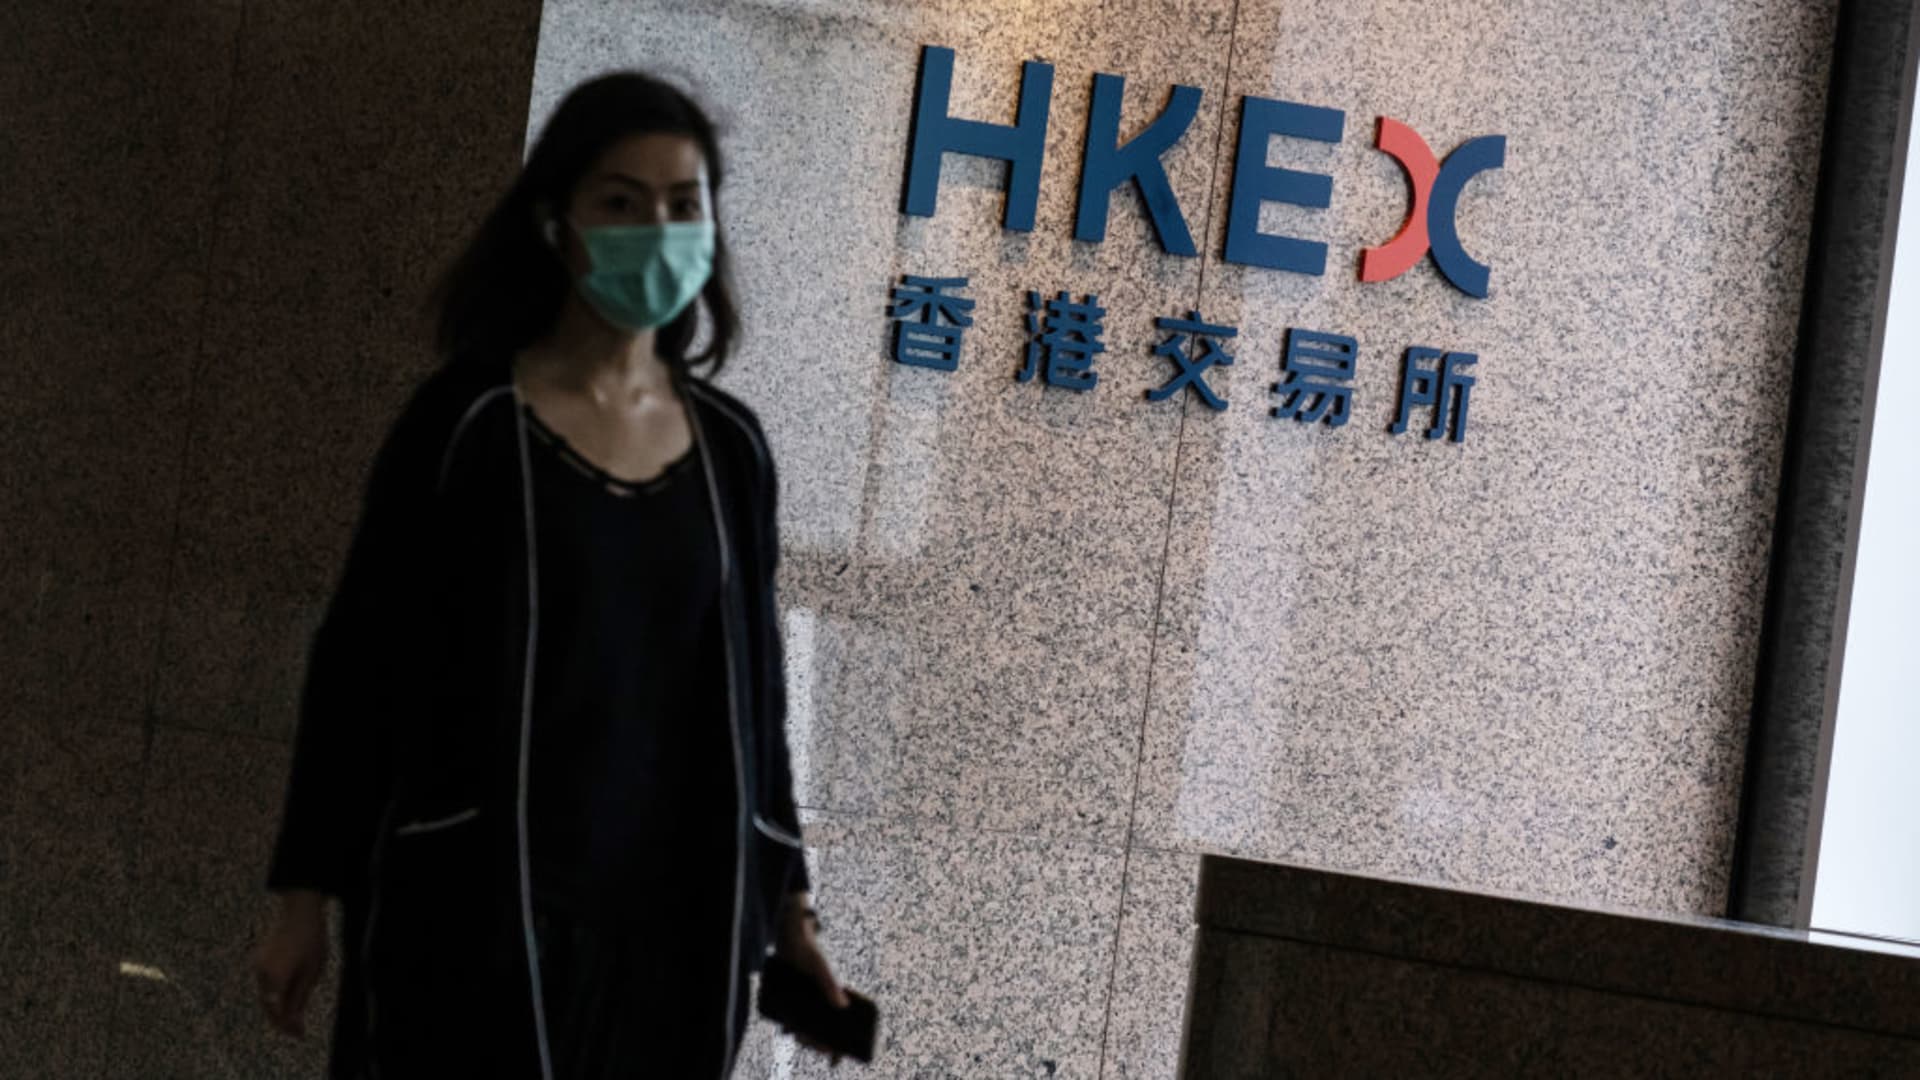 A person wearing a protective mask walks past signage for Hong Kong Exchanges & Clearing Ltd. (HKEX) displayed at the Exchange Square complex in Hong Kong, China, on Wednesday, Aug. 19, 2020.